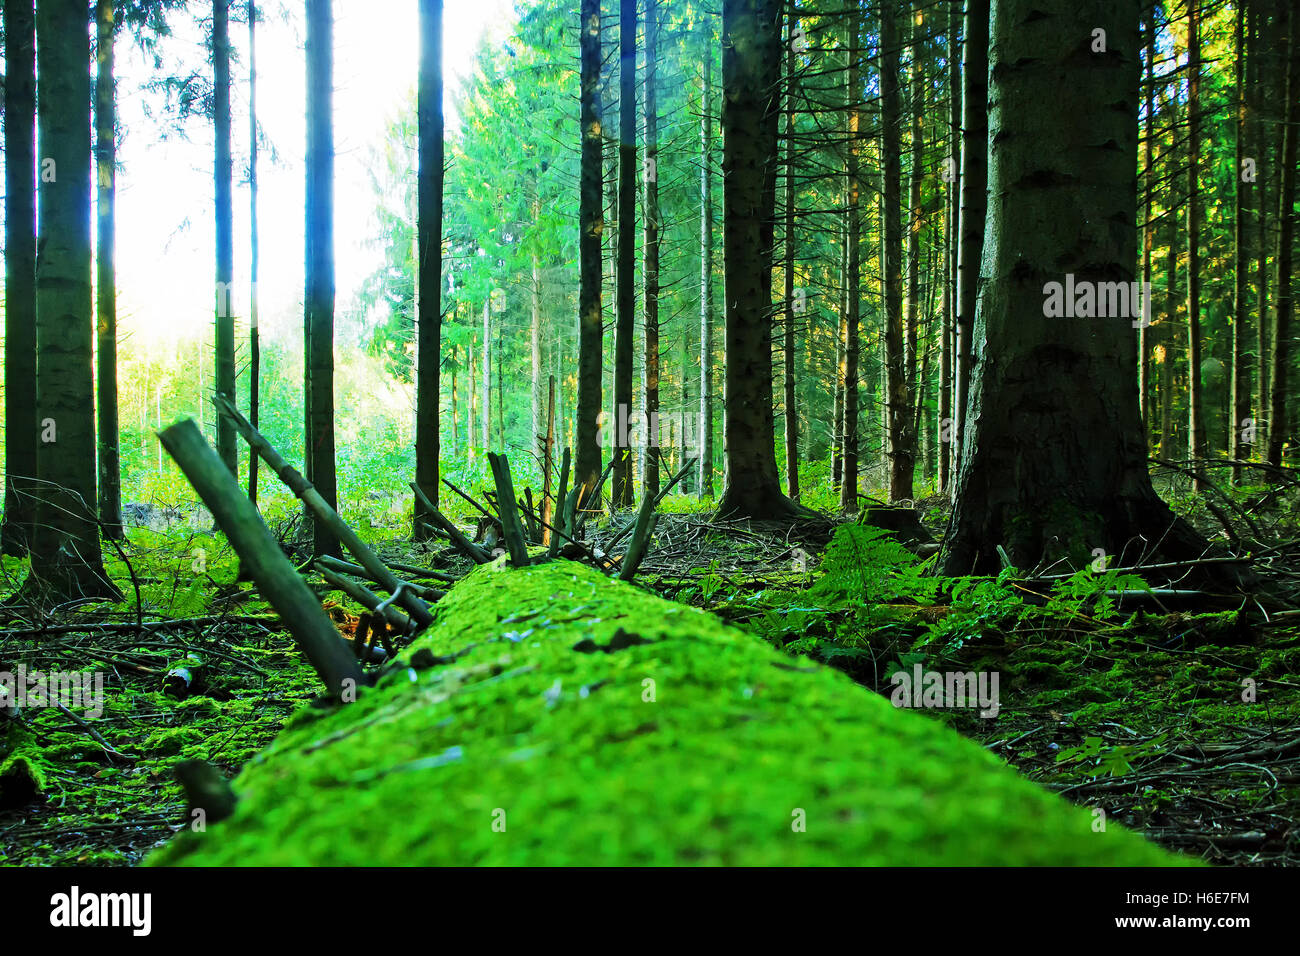 Natural green forest with tree trunk and moos on the floor Stock Photo